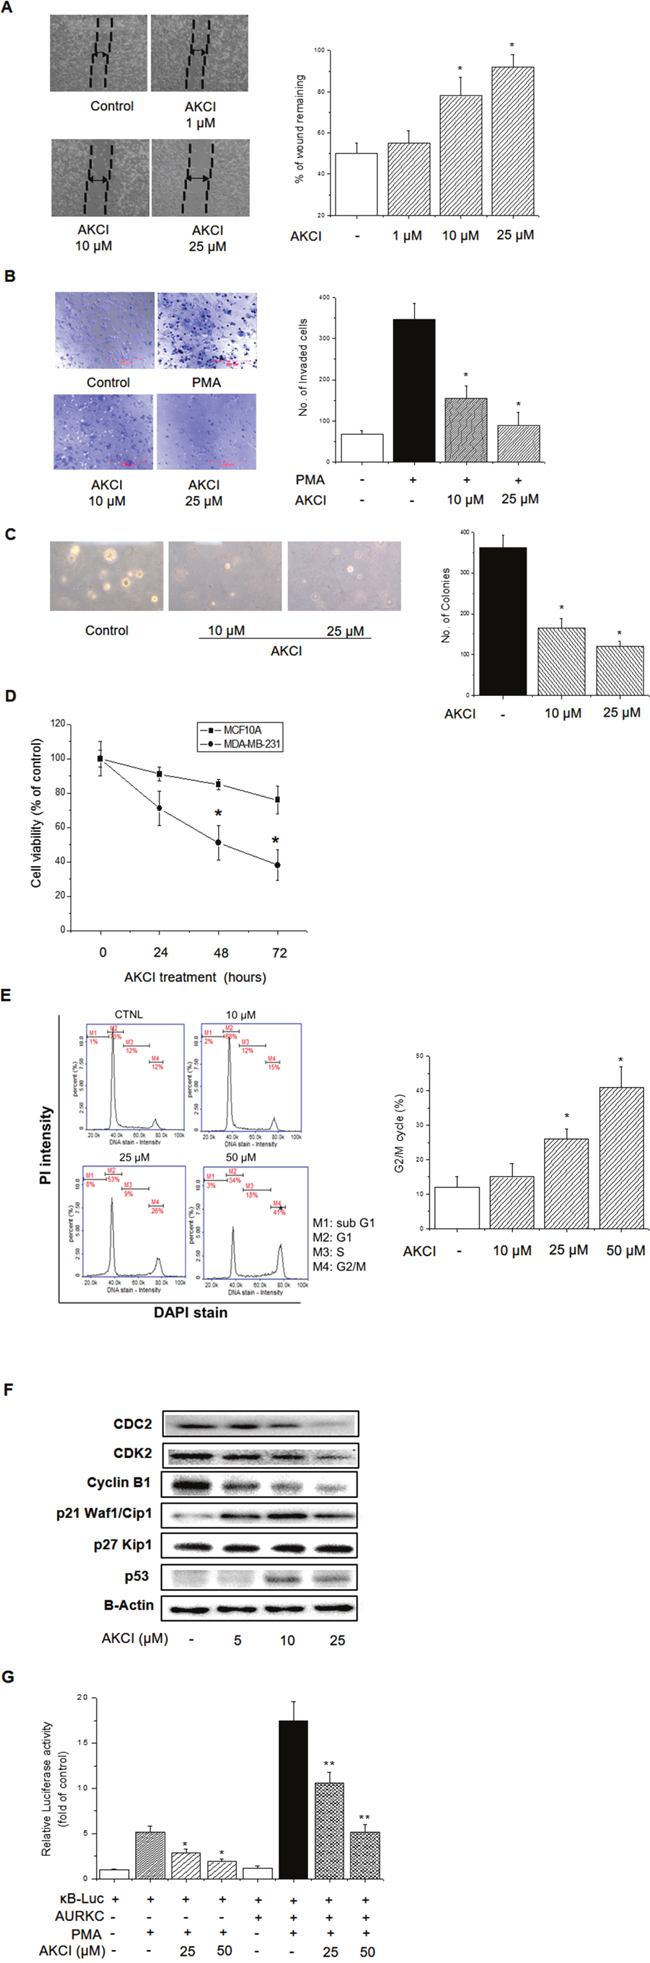 Inhibitory effects of AKCI on cancer cell transformation in breast cancer cells.